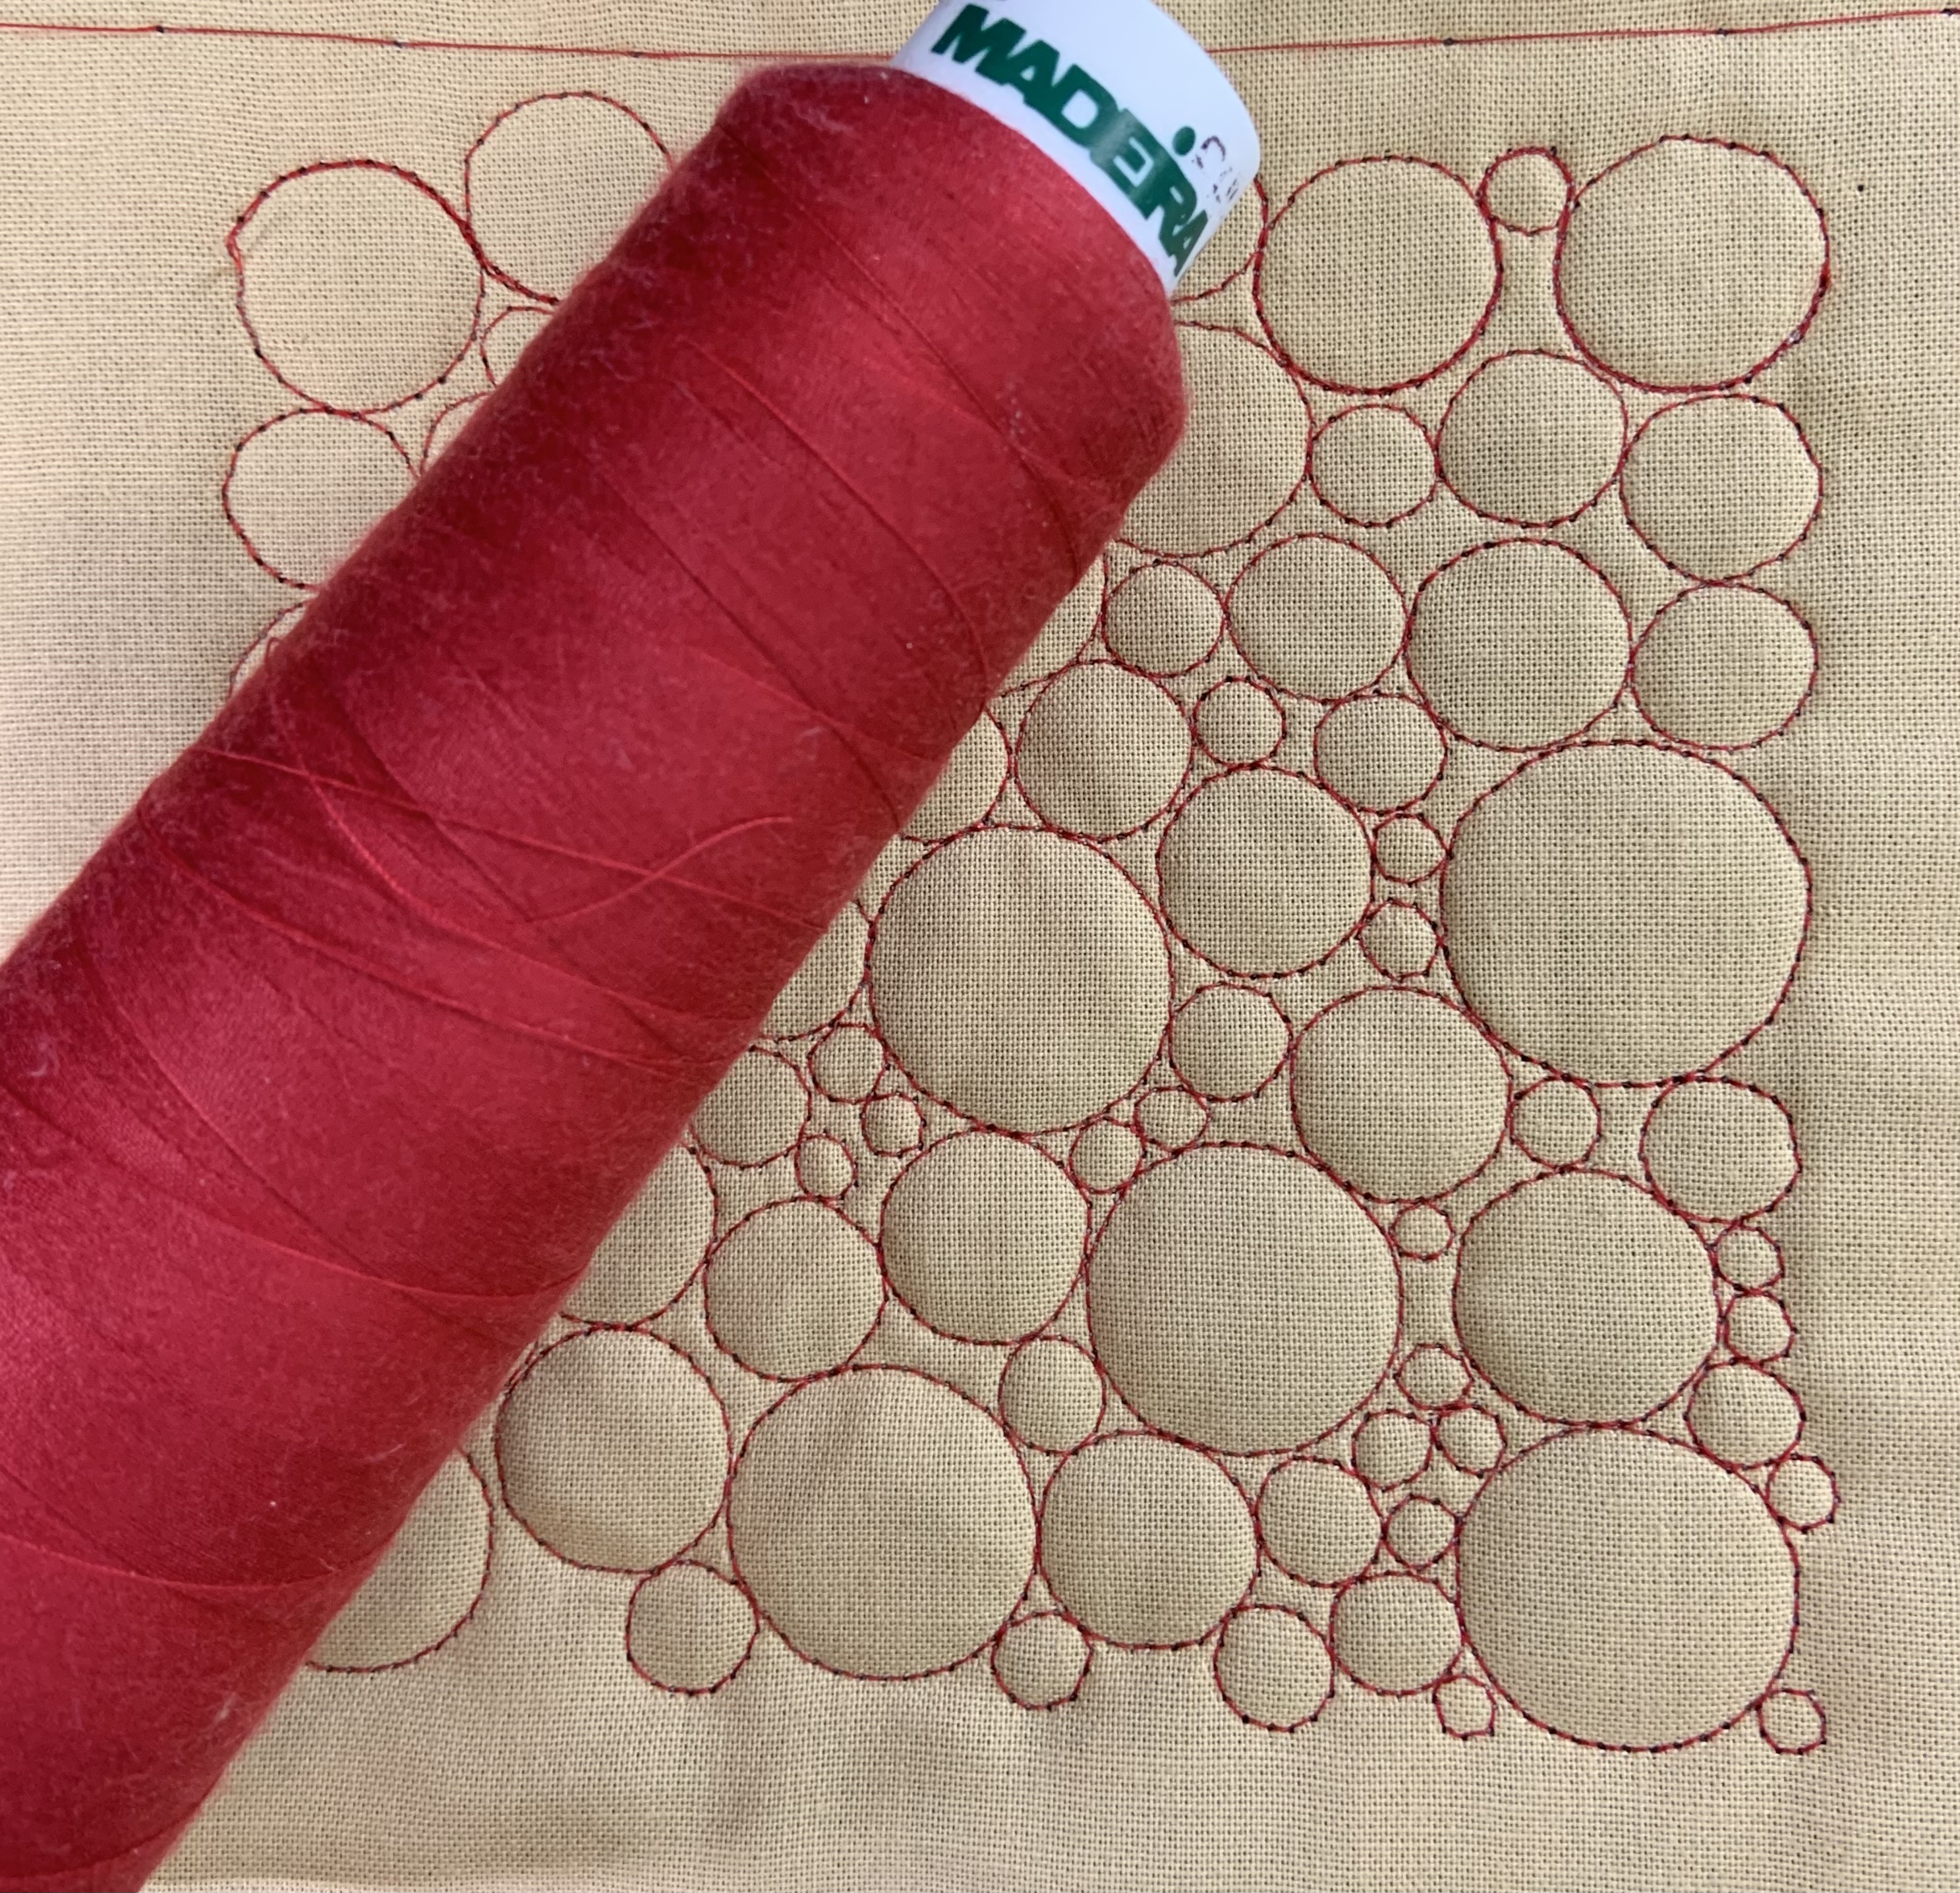 Threads – which one to use for quilting?